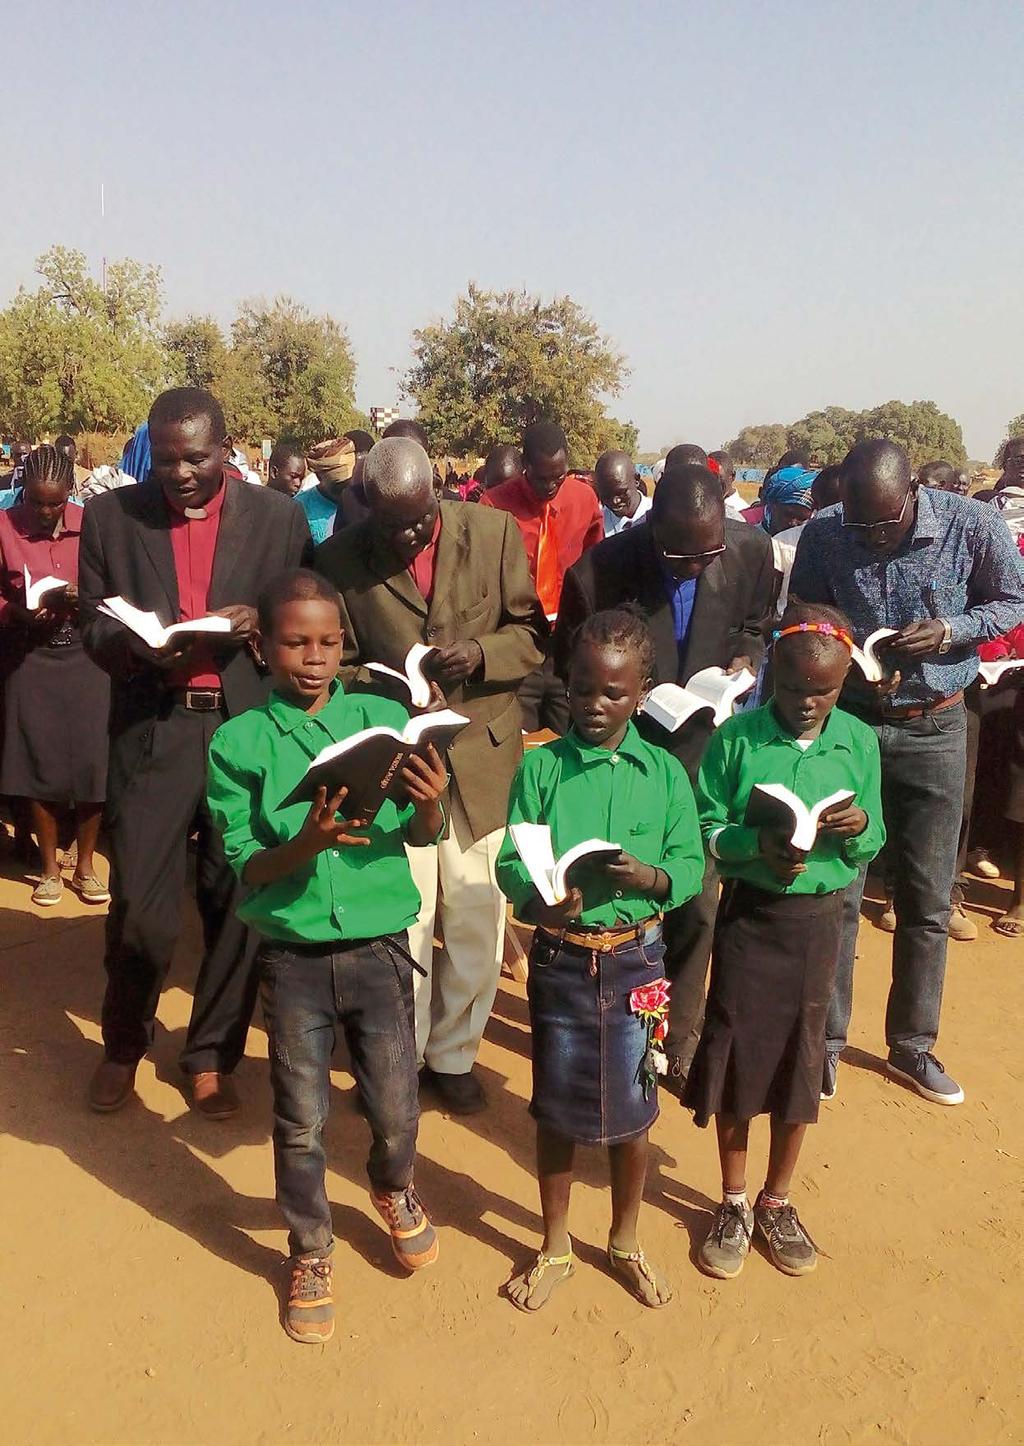 CASE STUDY: SOUTH SUDAN Good news is in short supply in war-torn South Sudan, but here young and old celebrate the launch of the very first Mabaan Bible, published in 2017 two years ahead of schedule!